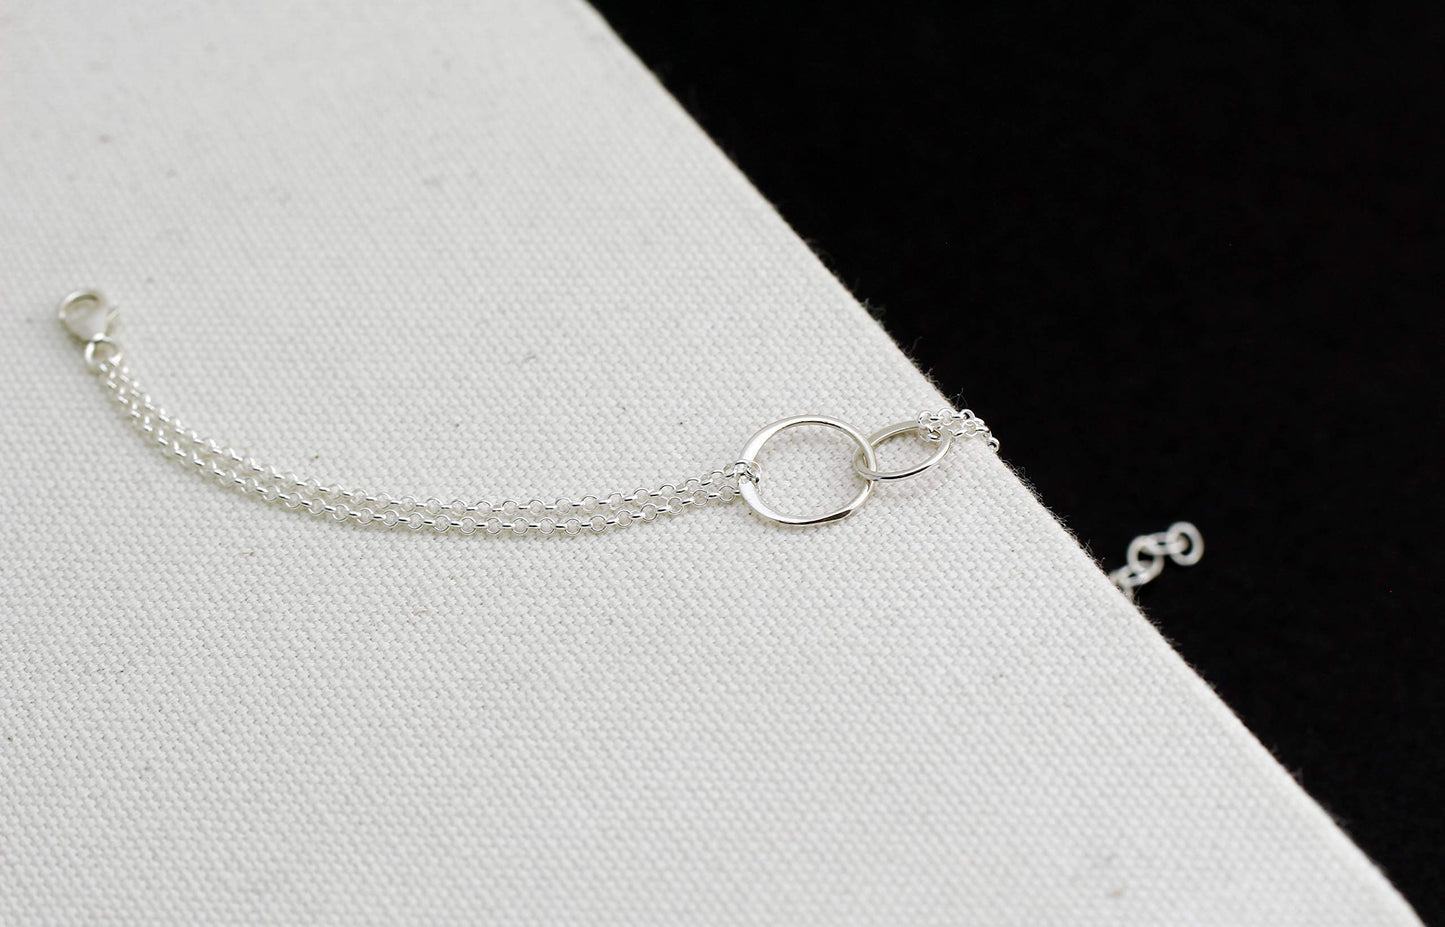 Bonus Sister Bracelet • Two Connected Circles • 925 Sterling Silver • Sister in law • Bride or Groom Sister • Adopted • Stepsister Best Friend • Friendship Love Gift • Appreciation Gratitude Jewelry